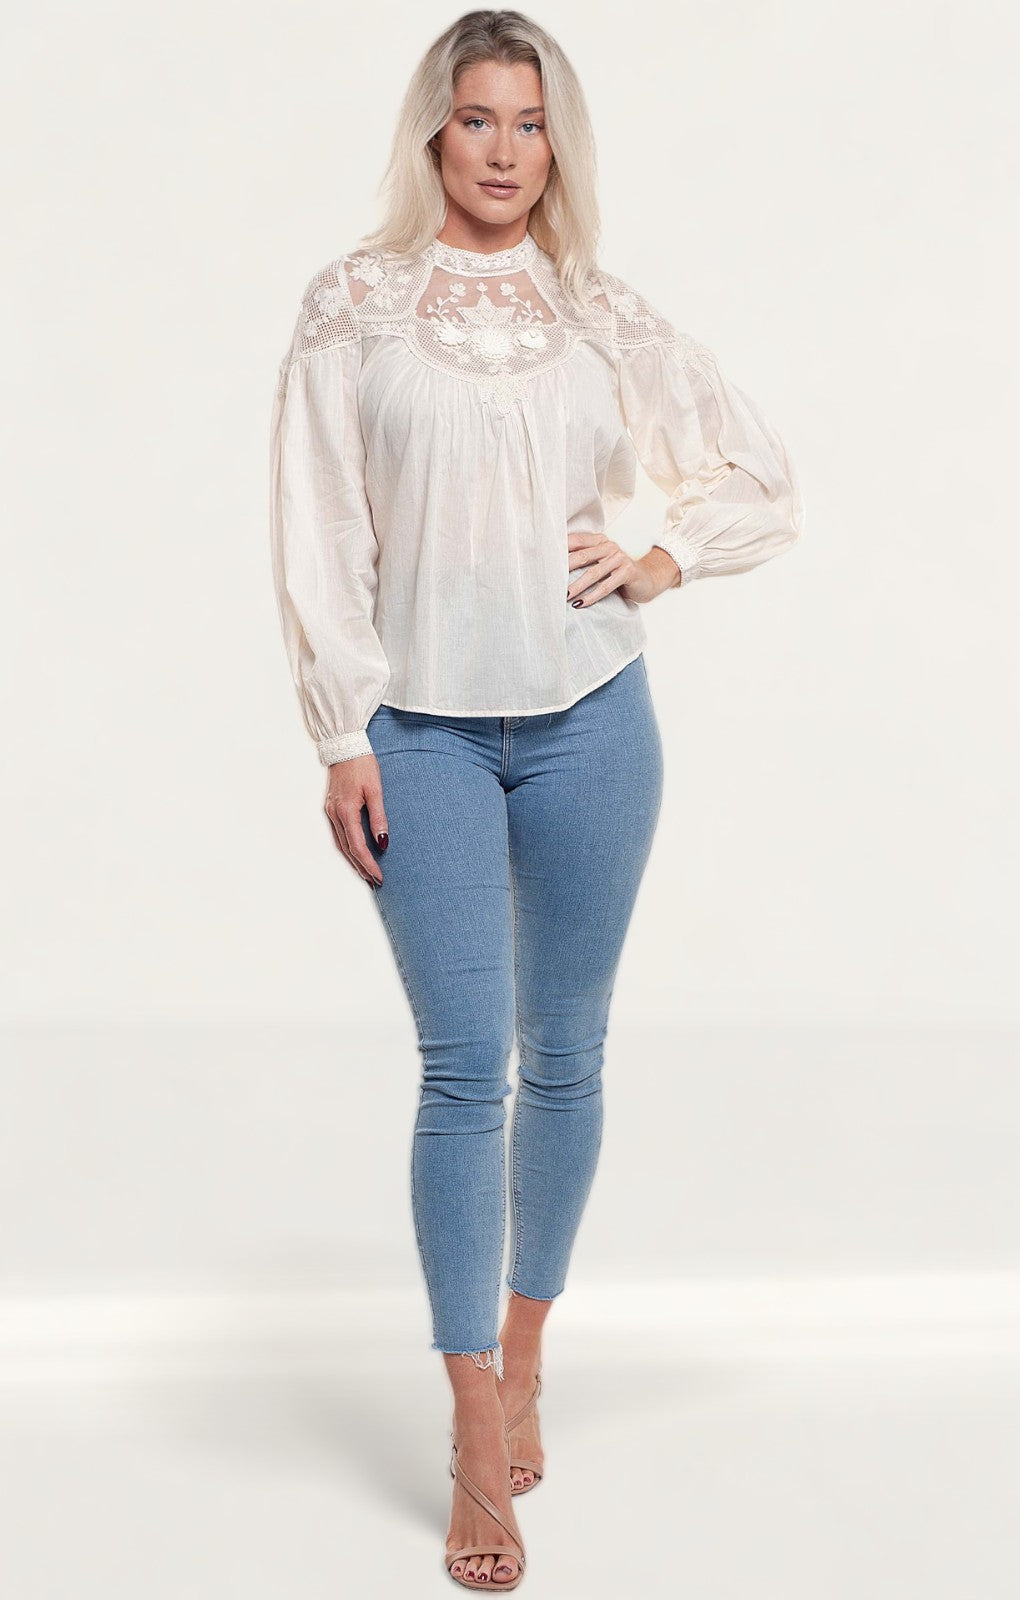 Zara Ecru Embroidered Blouse product image